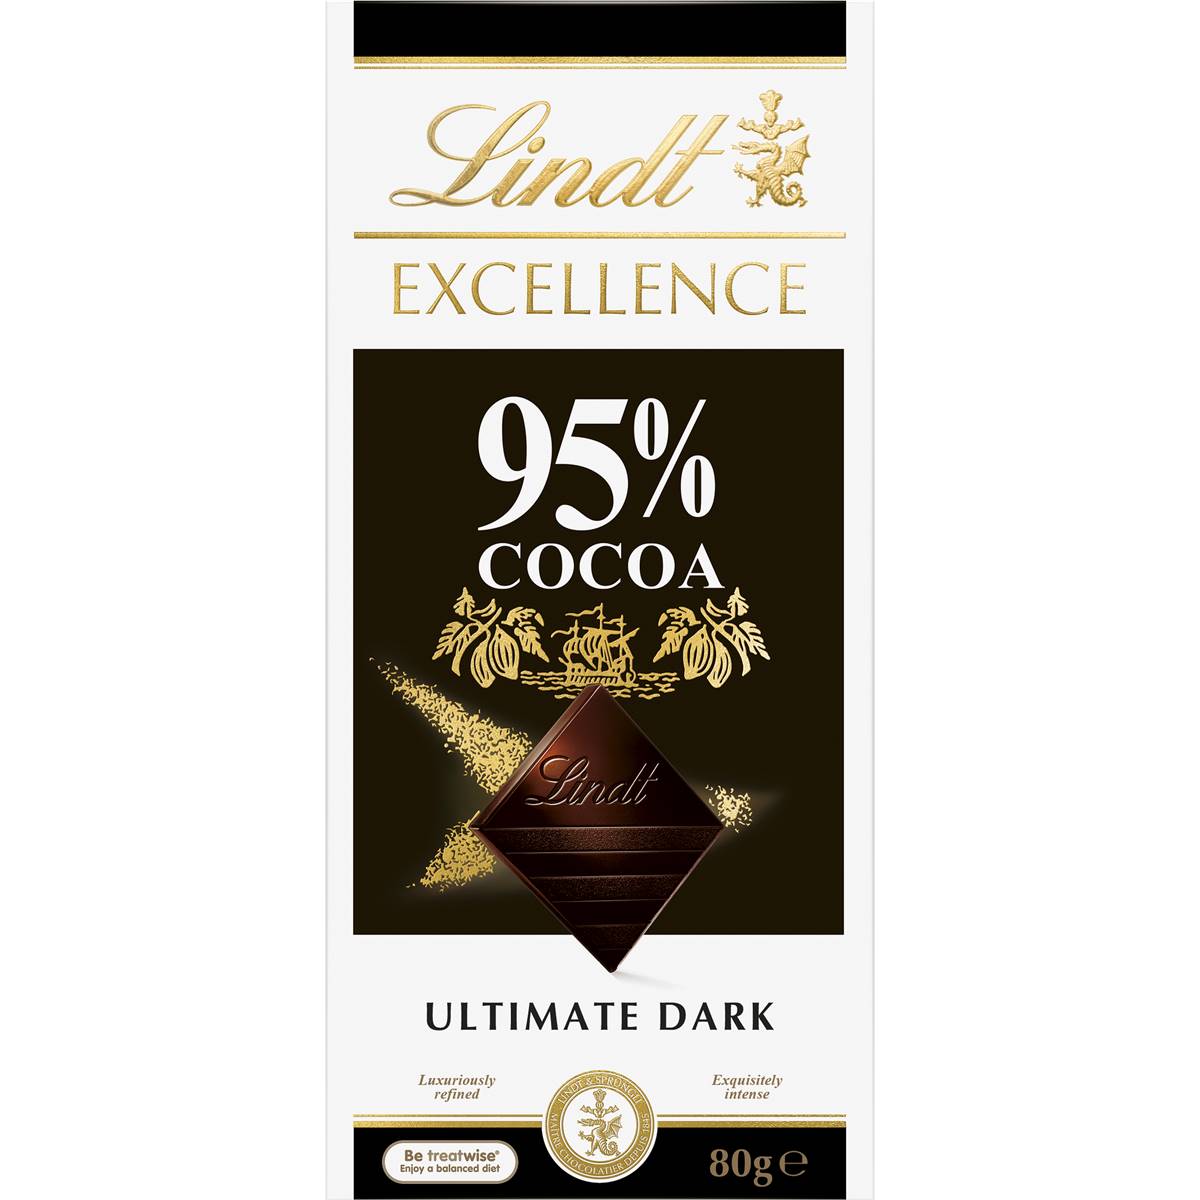 Calories in Lindt Excellence 95% Cocoa Dark Chocolate Block